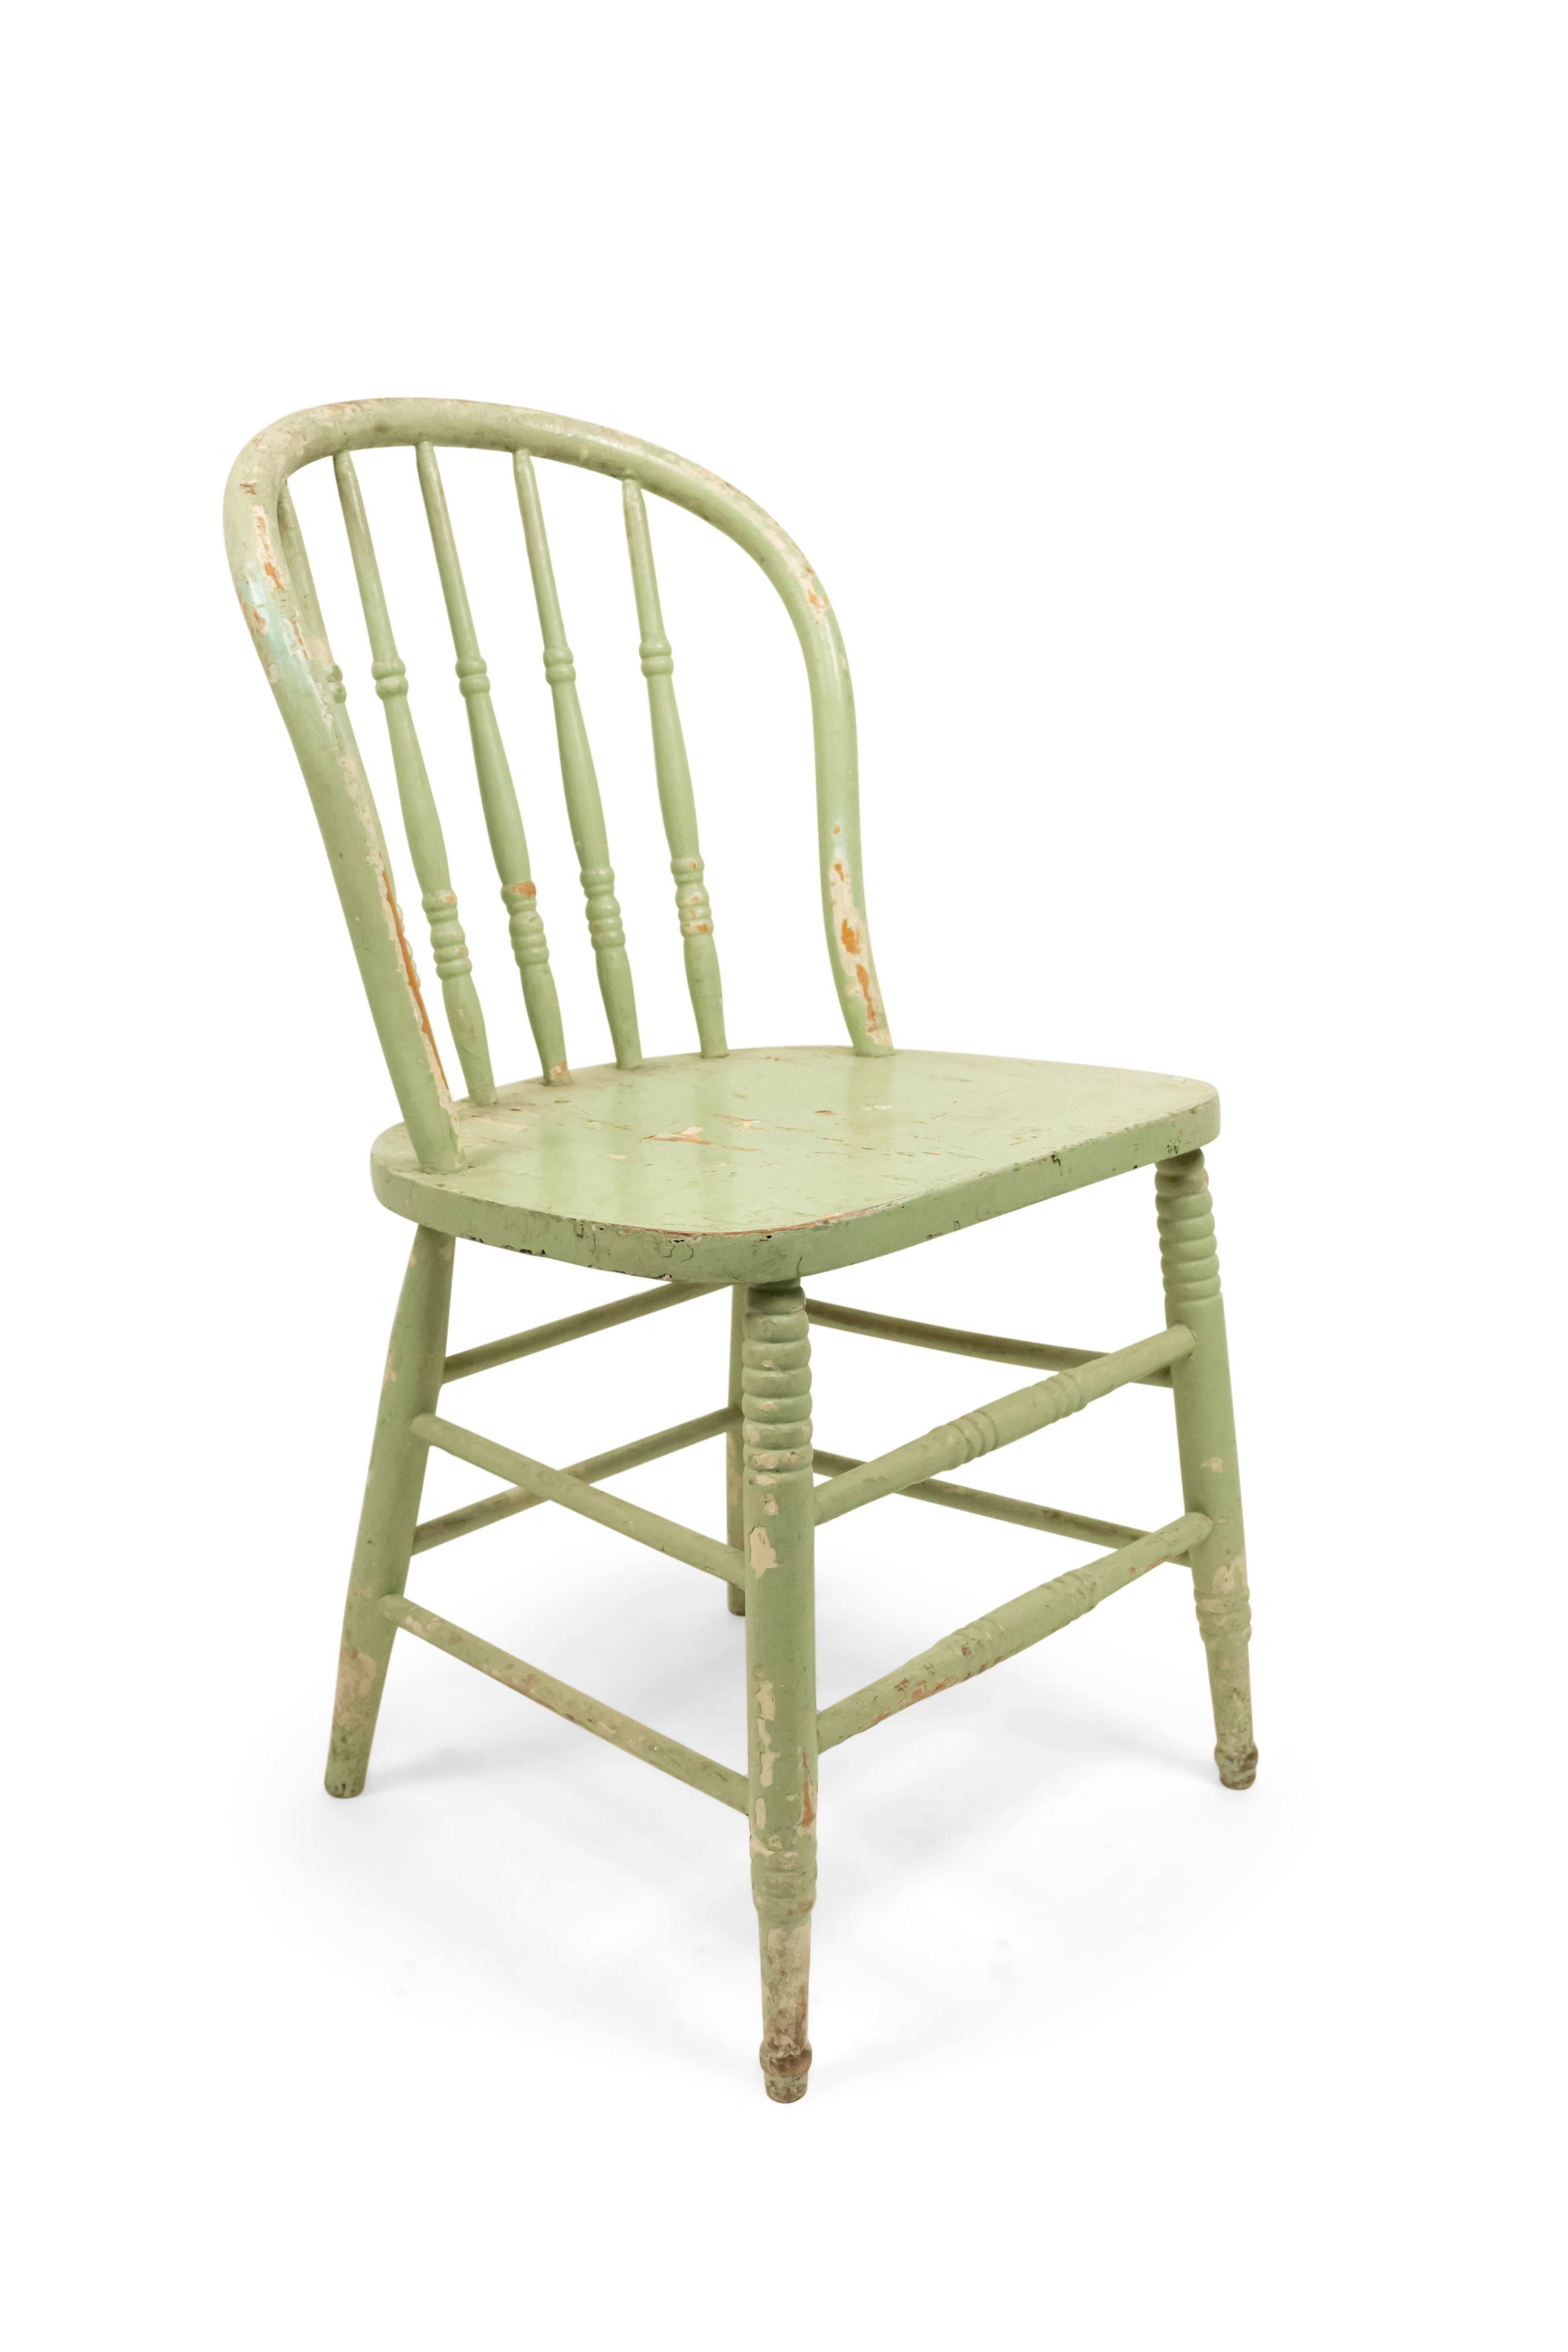 5 American Country Green Spindle Side Chairs In Good Condition For Sale In New York, NY